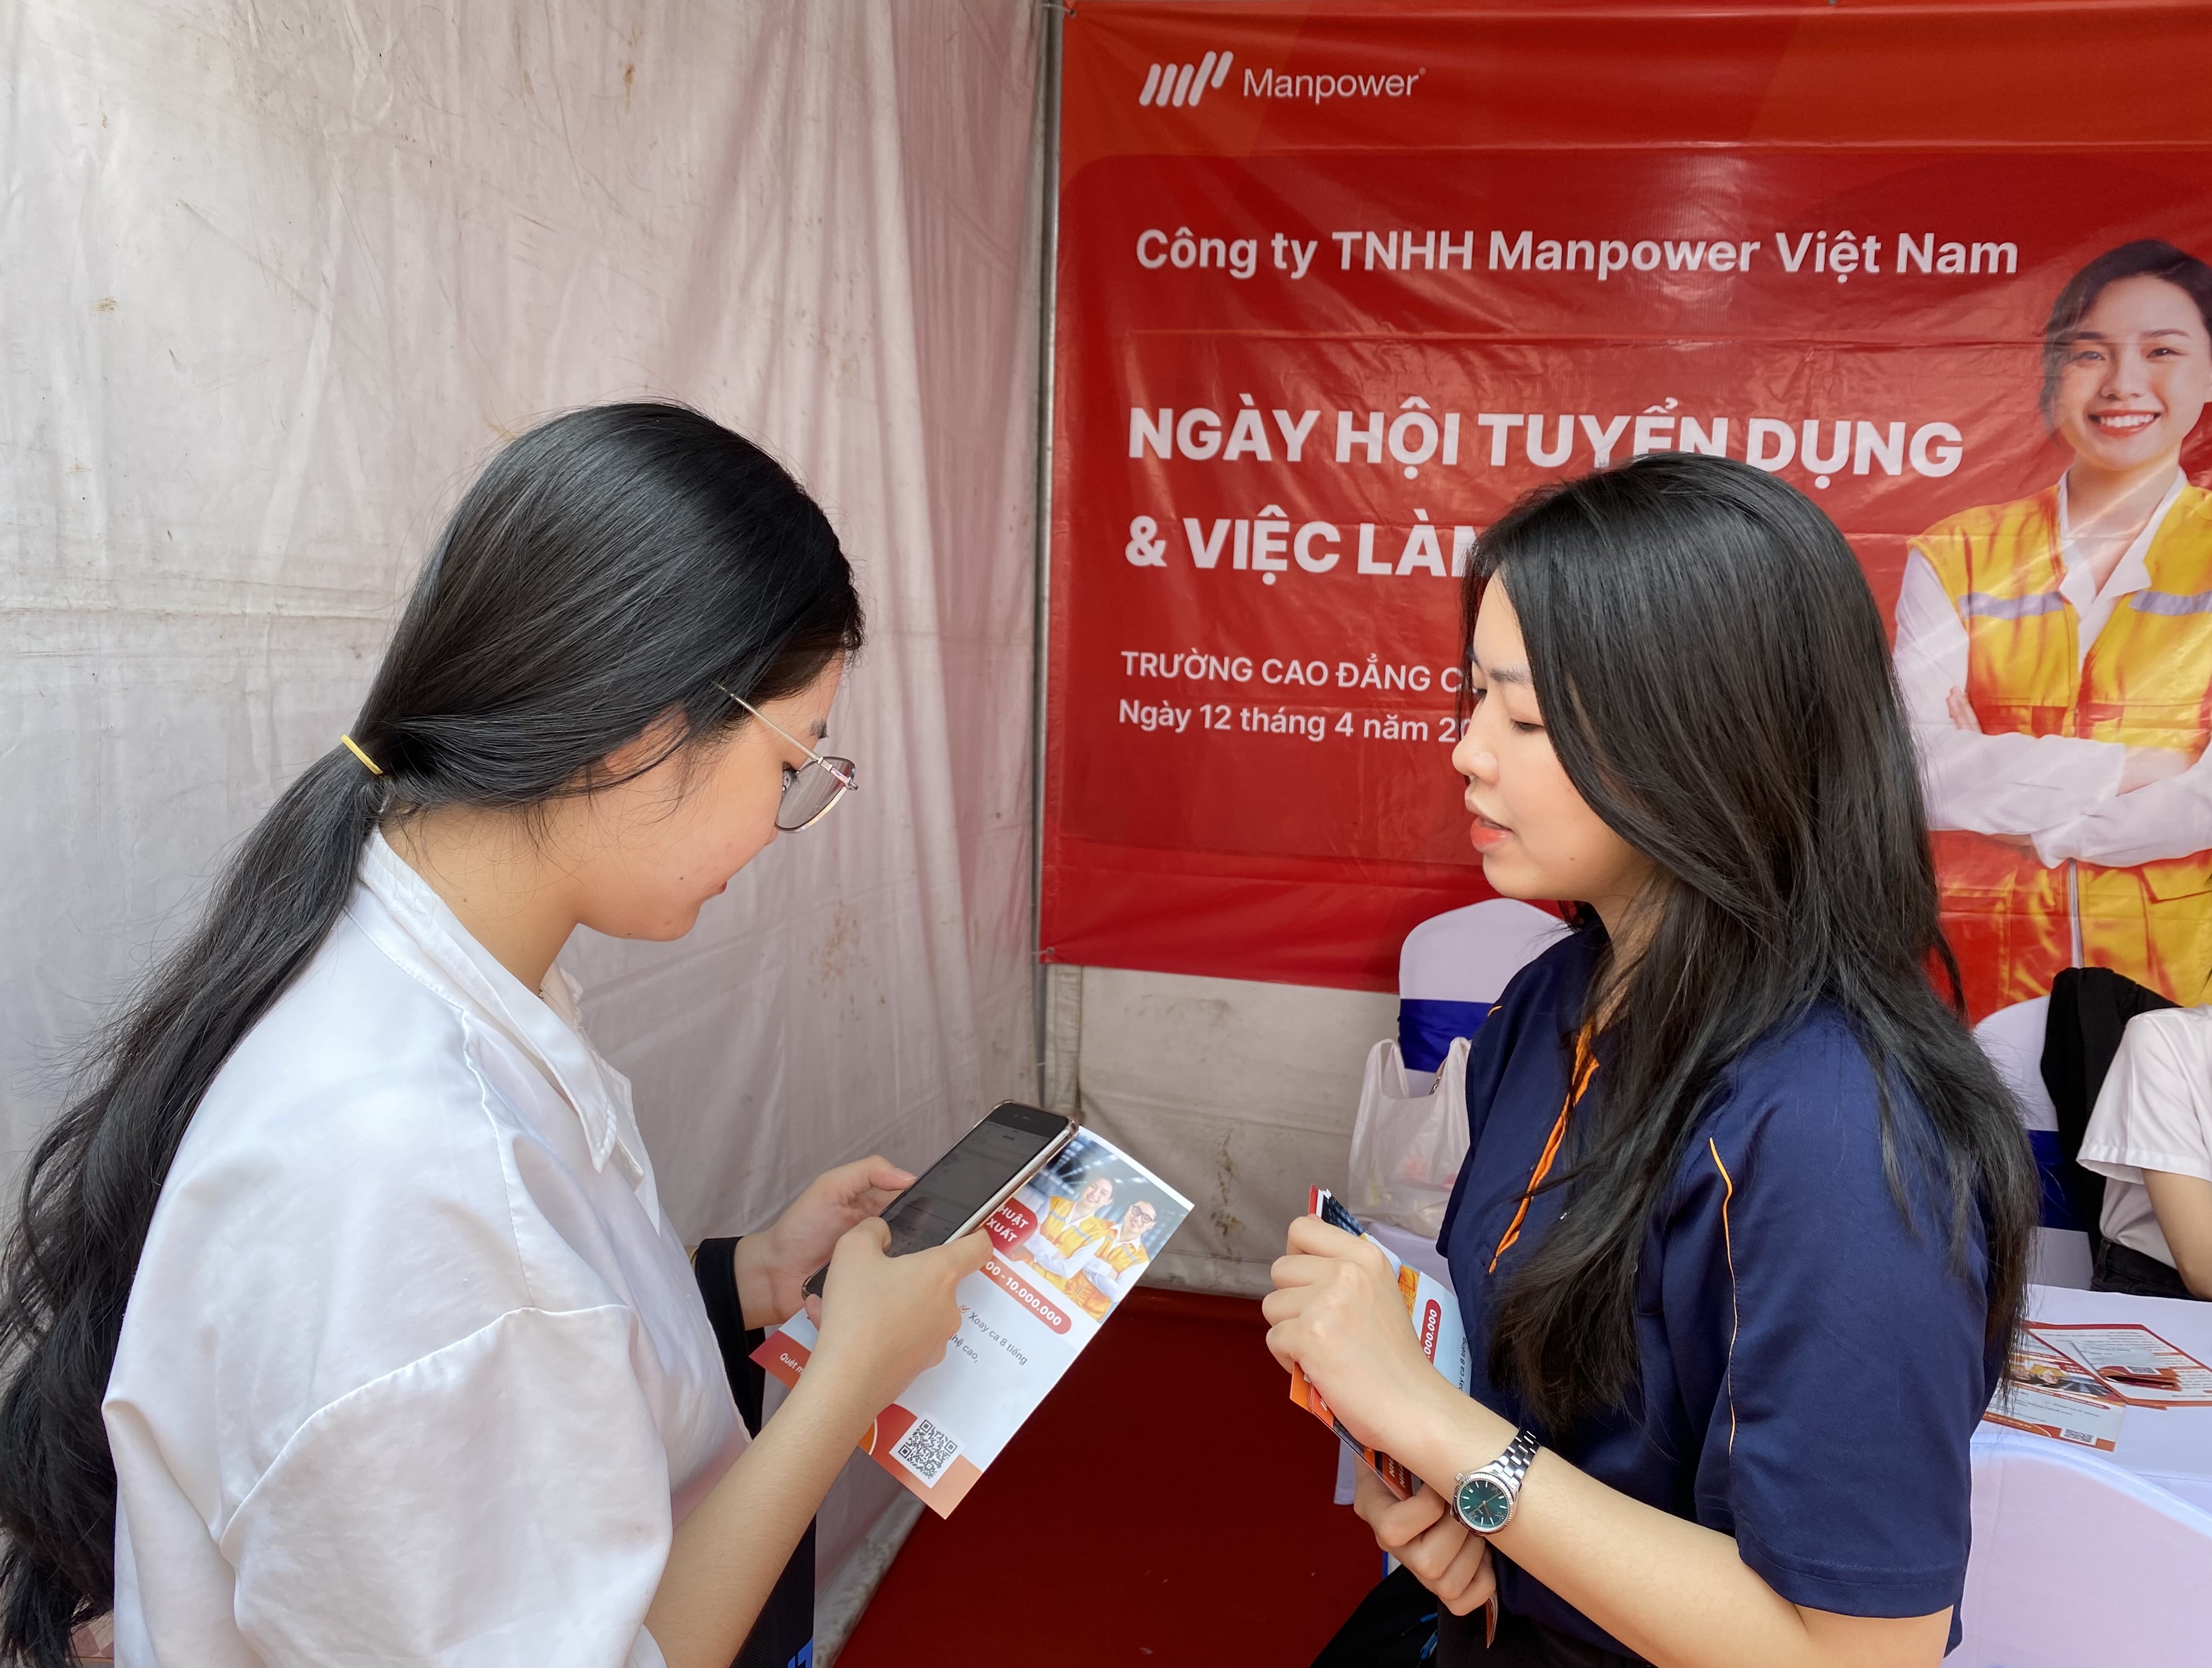 A Manpower Vietnam recruitment consultant guided a student to apply for entry-level engineering jobs at Manpower Vietnam through a QR code